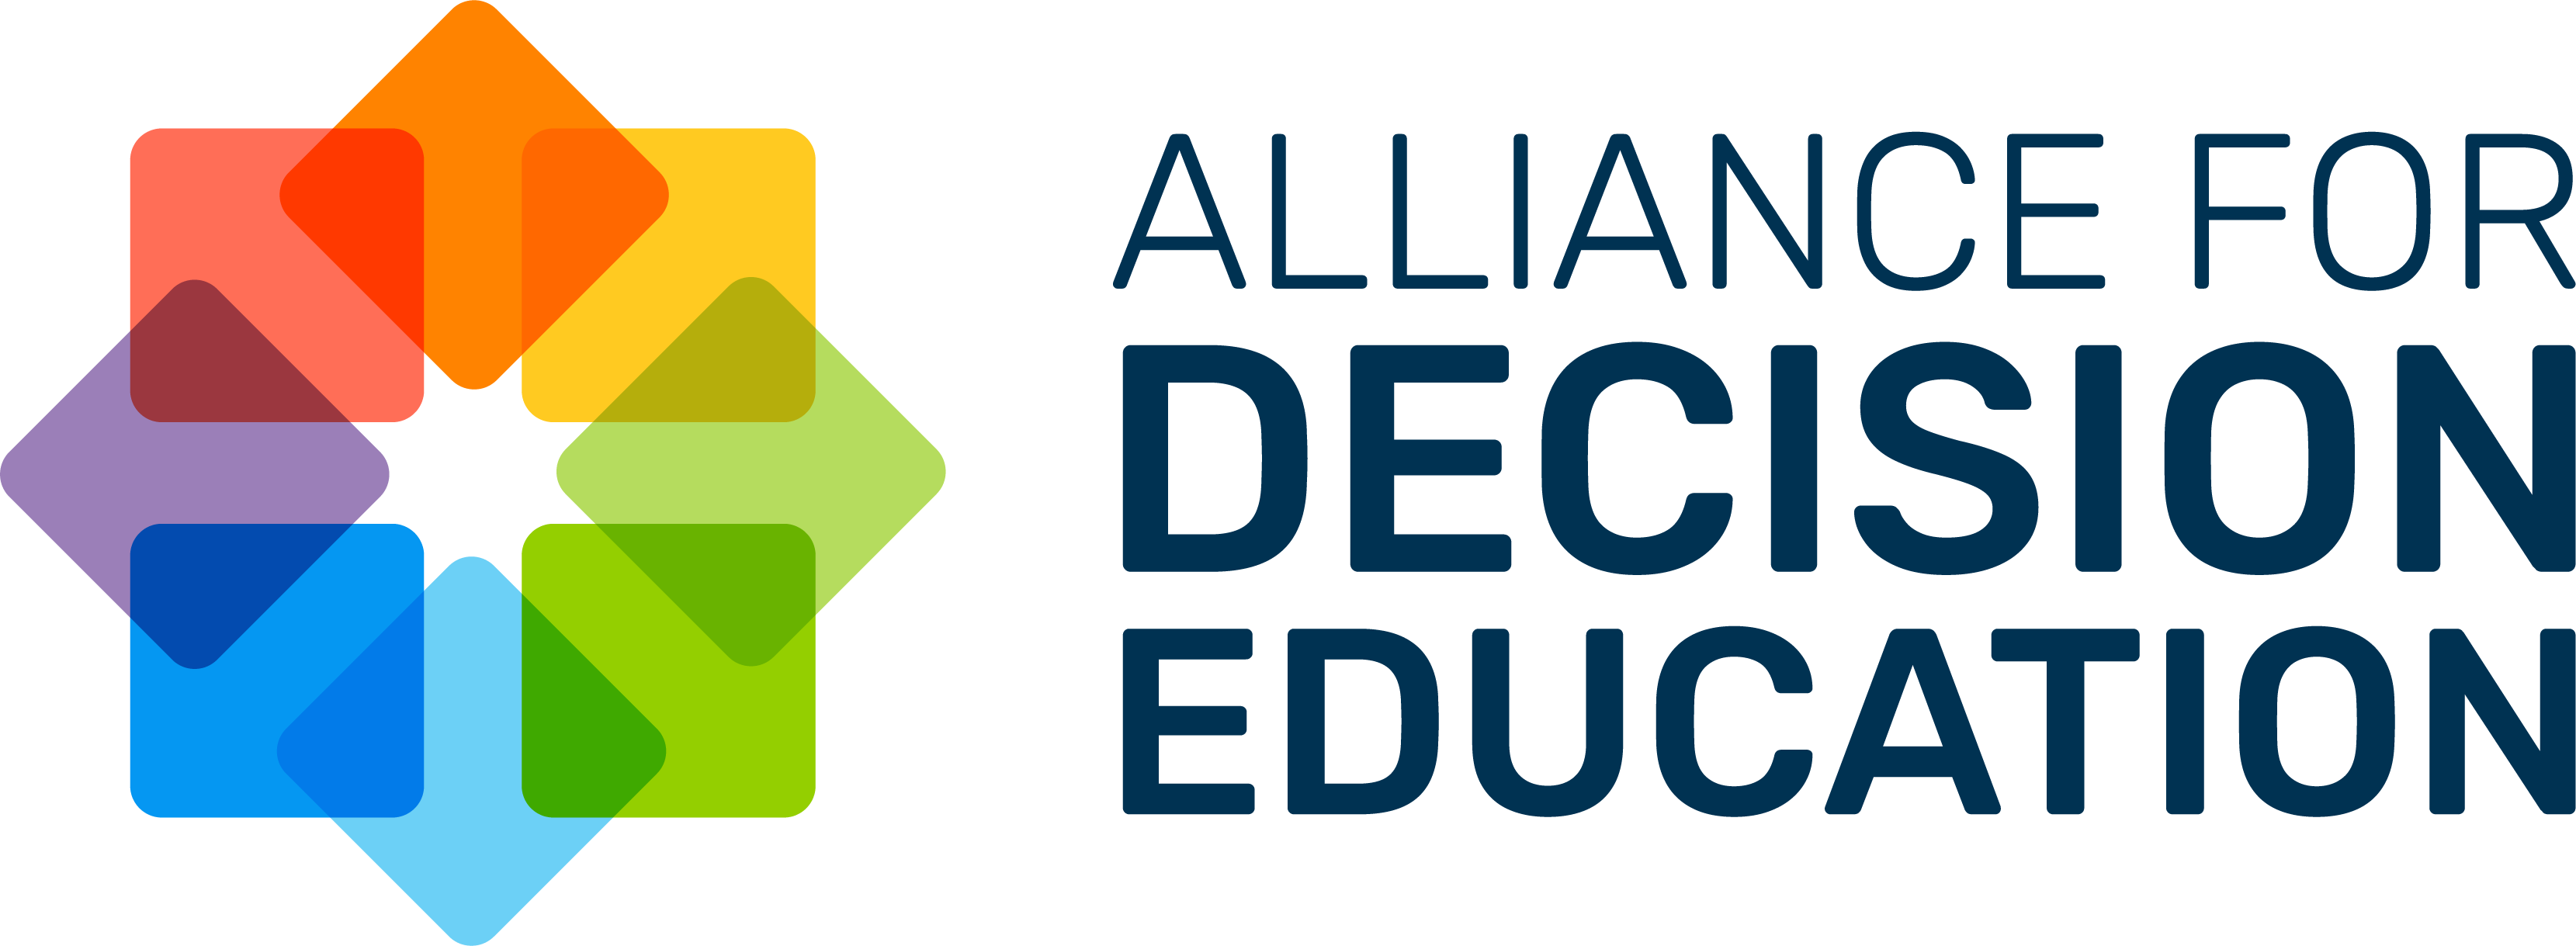 Alliance for Decision Education